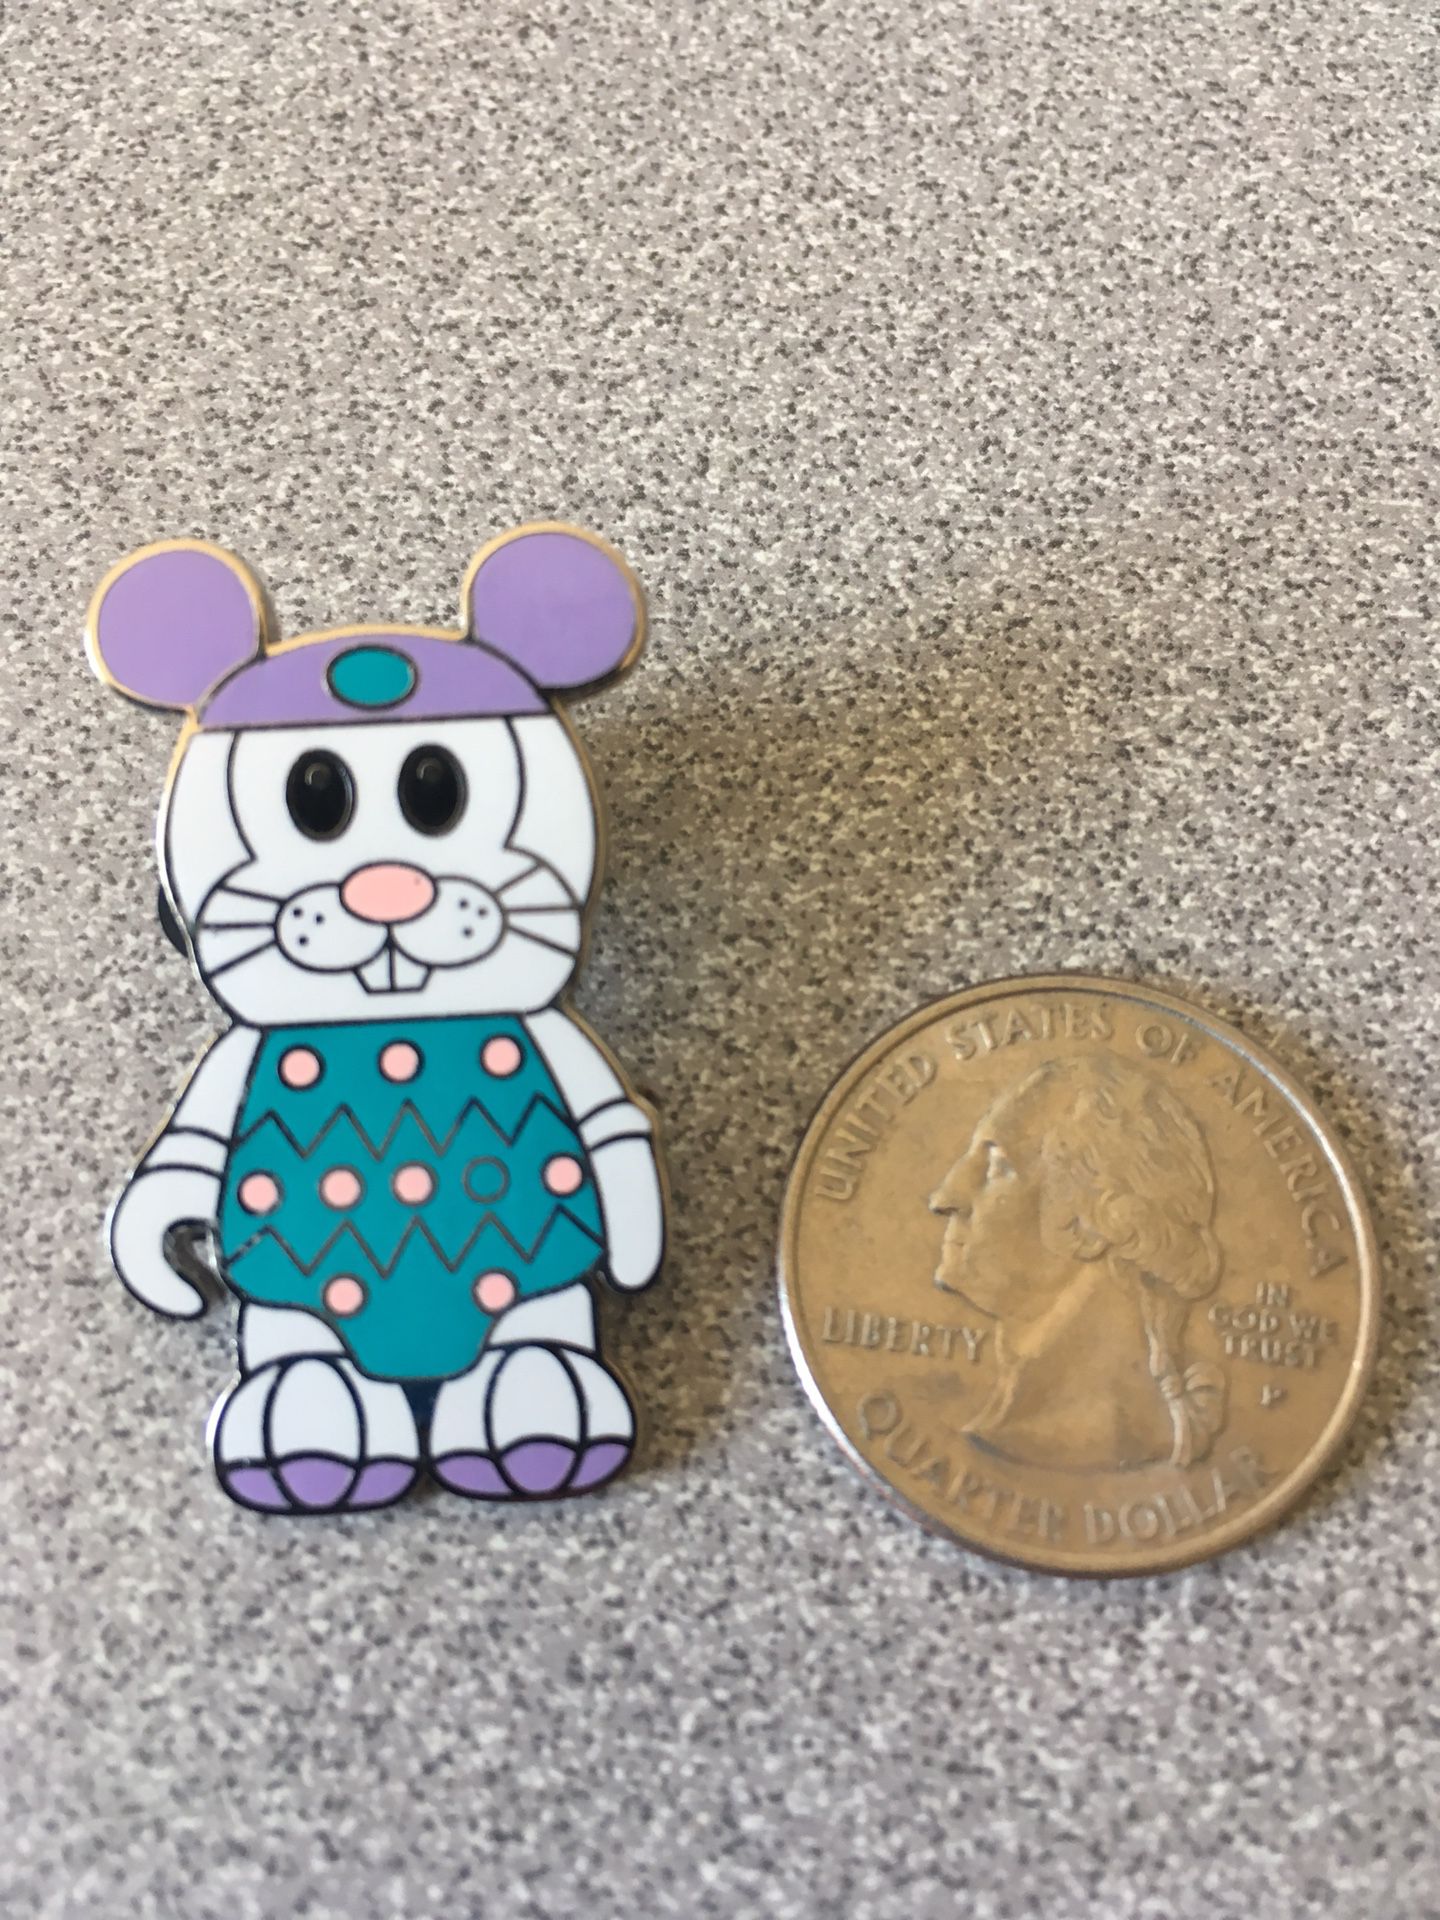 2009 Disney Parks Pin - Mickey Mouse as Easter Bunny Vinylmation